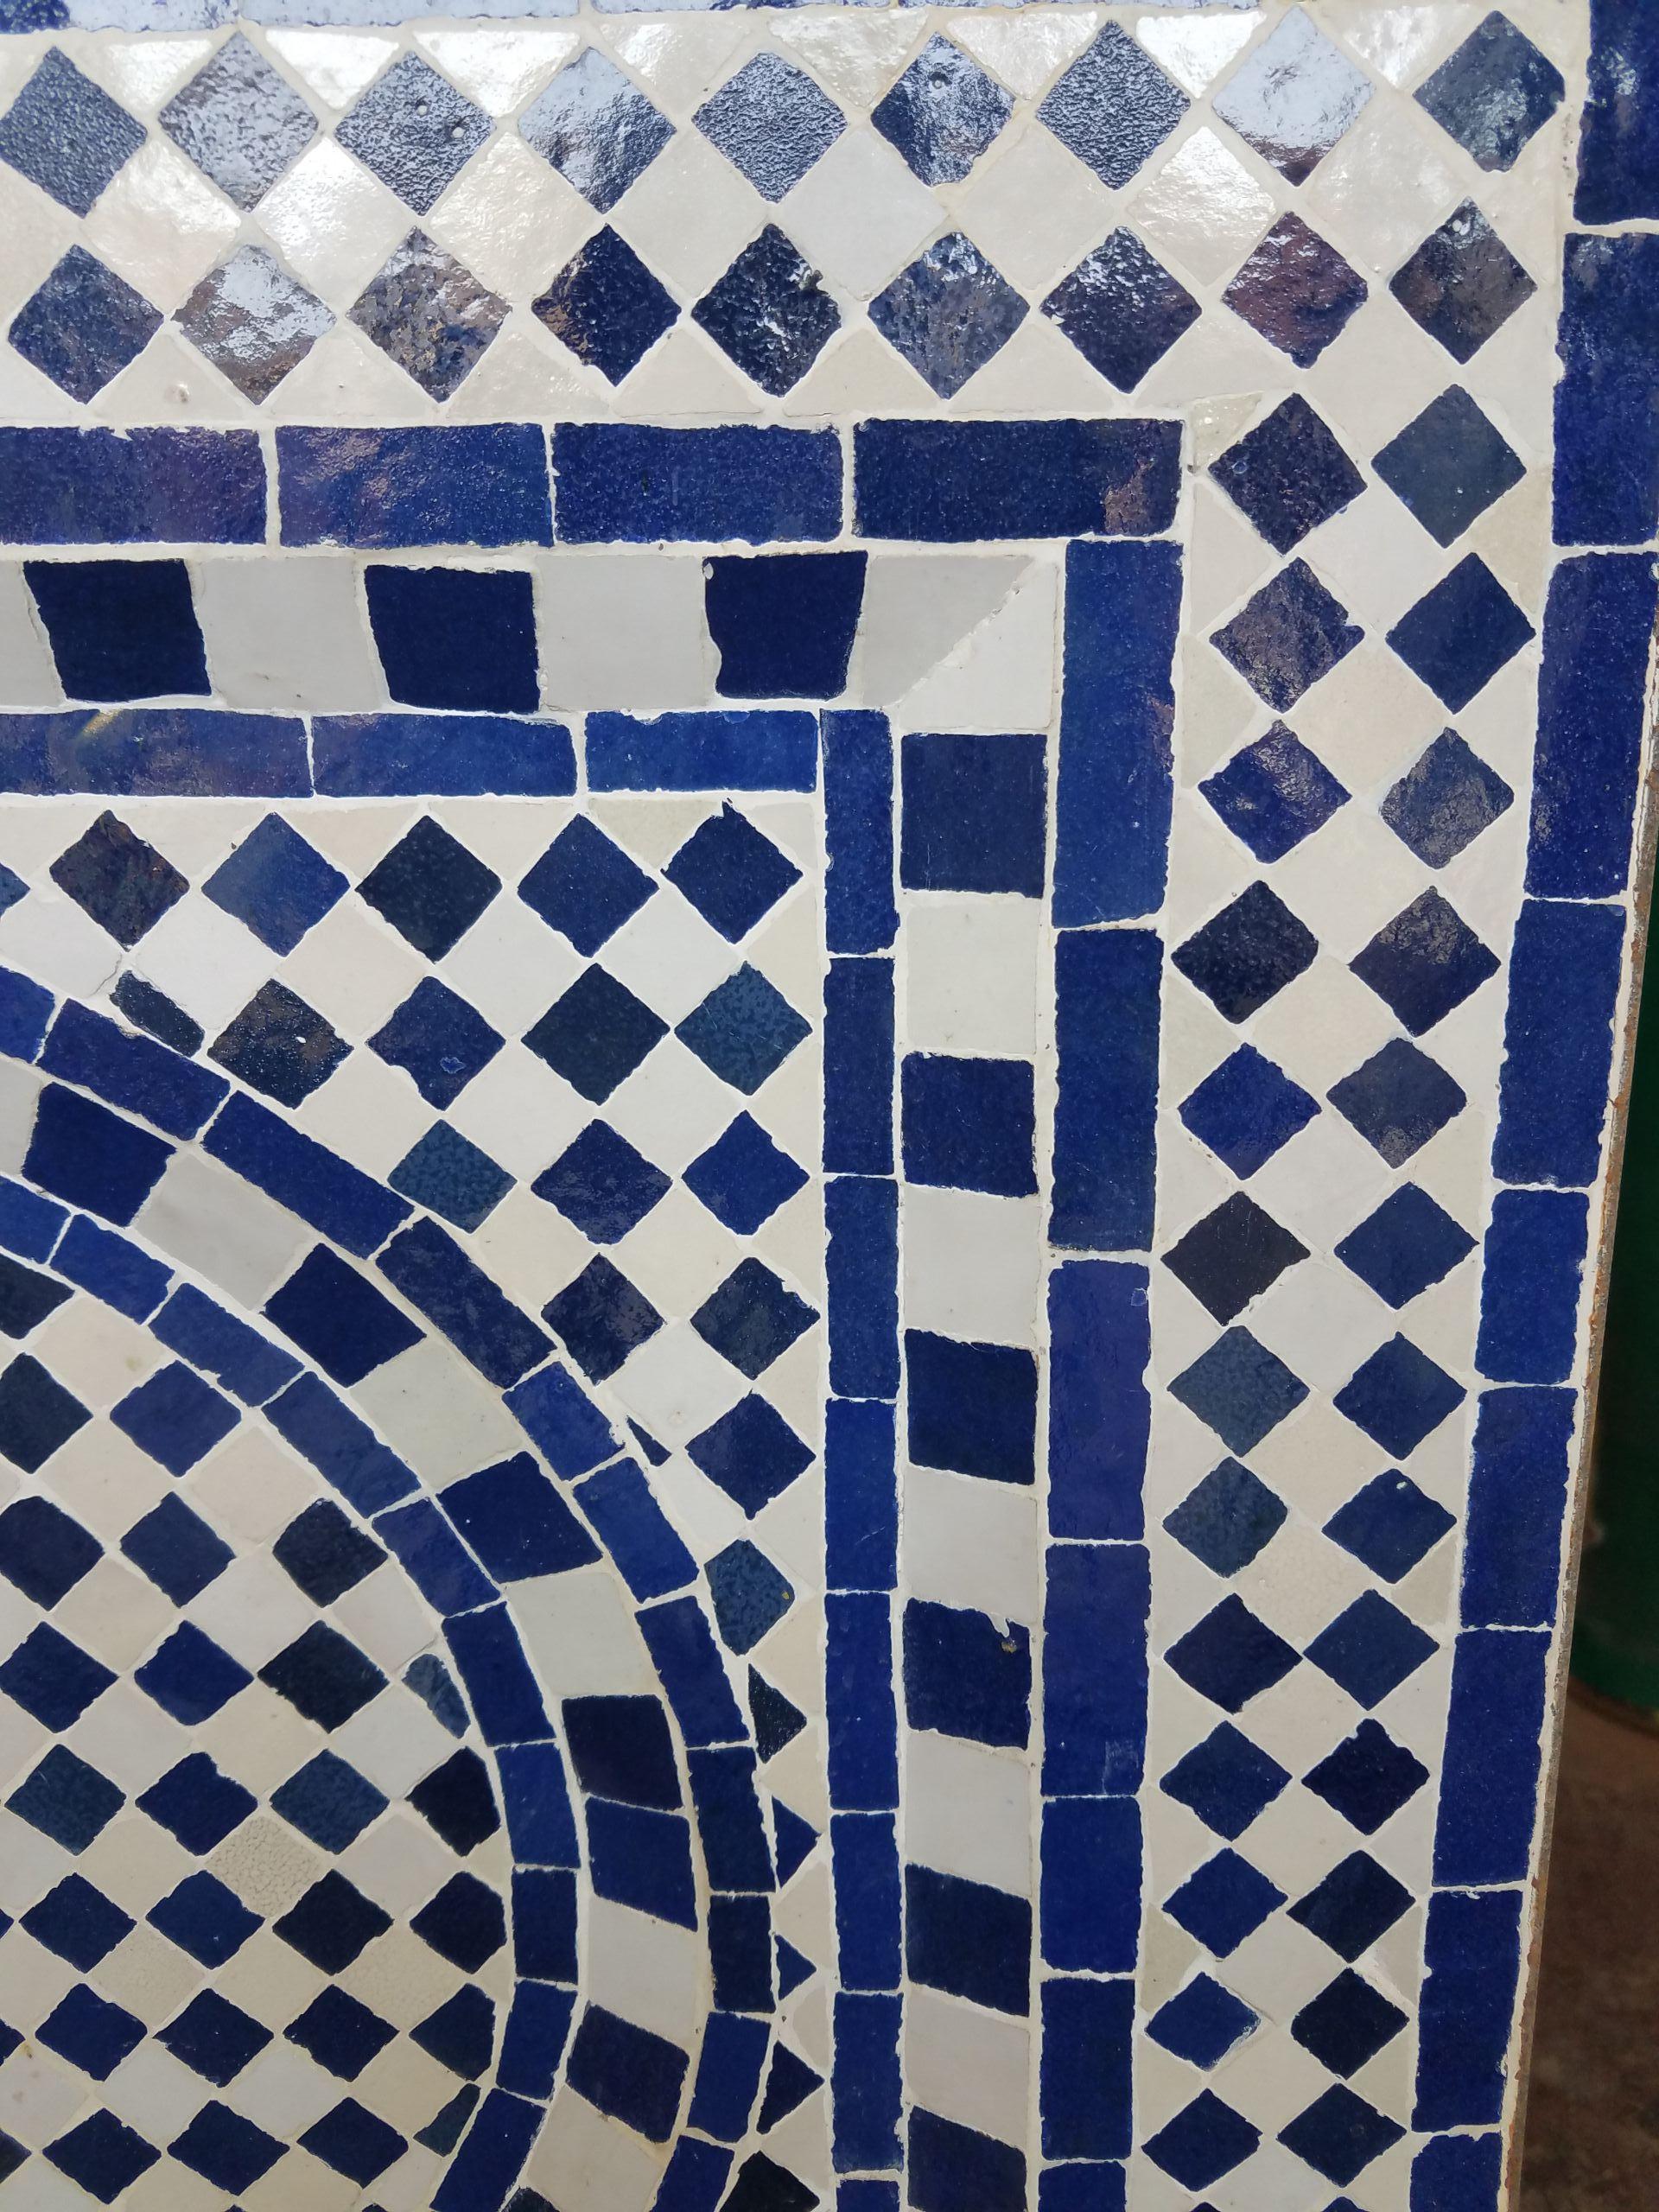 Mini Moroccan mosaic fountain handmade in Marrakech, Morocco. Colors are blue or white. This type of fountain is usually found in courtyards and Riads all-over Morocco. Measuring approximately 28